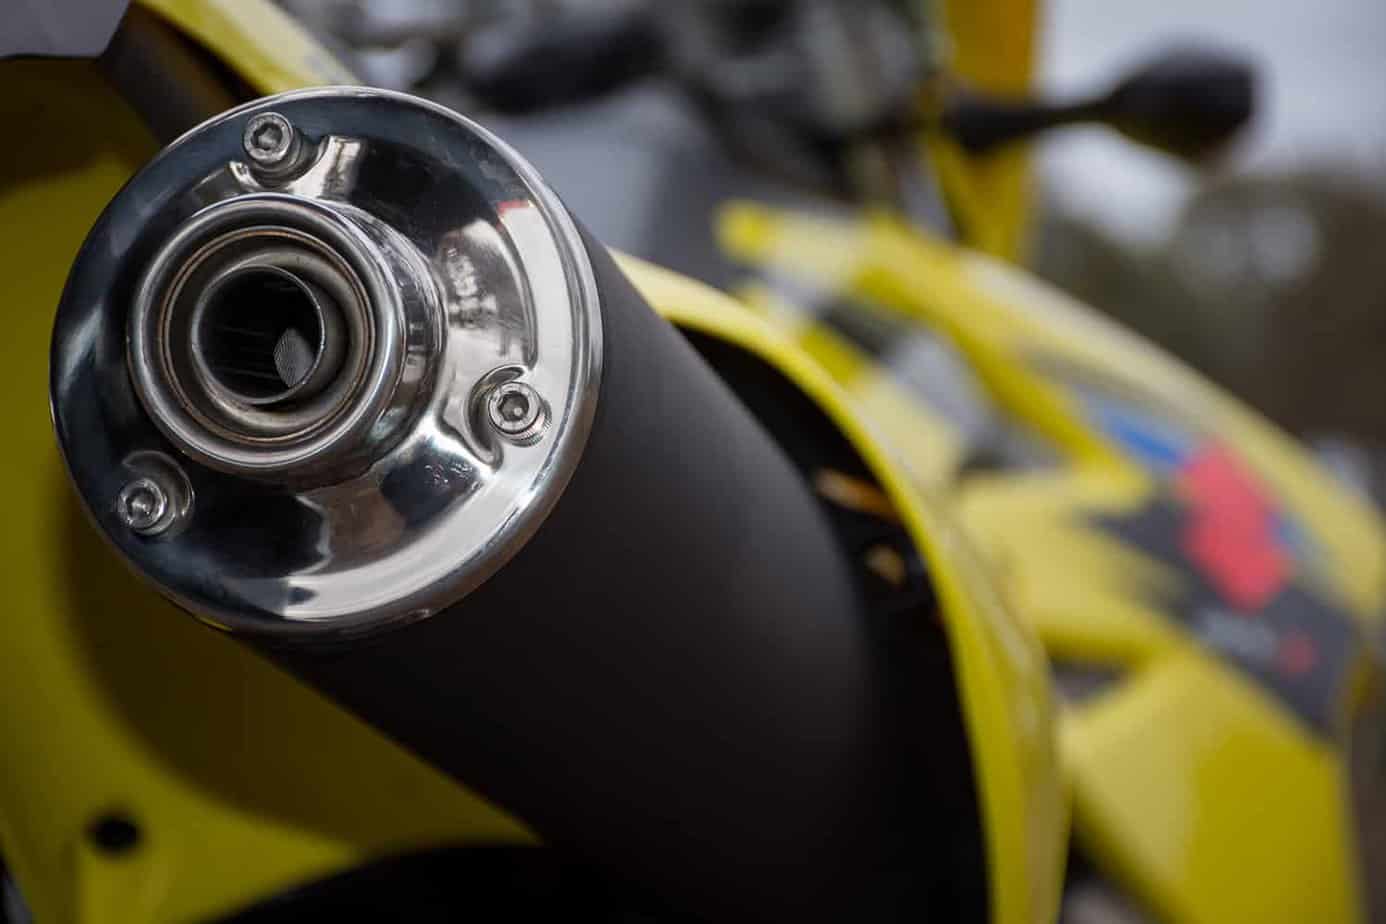 How Does a Motorcycle Baffle Work?